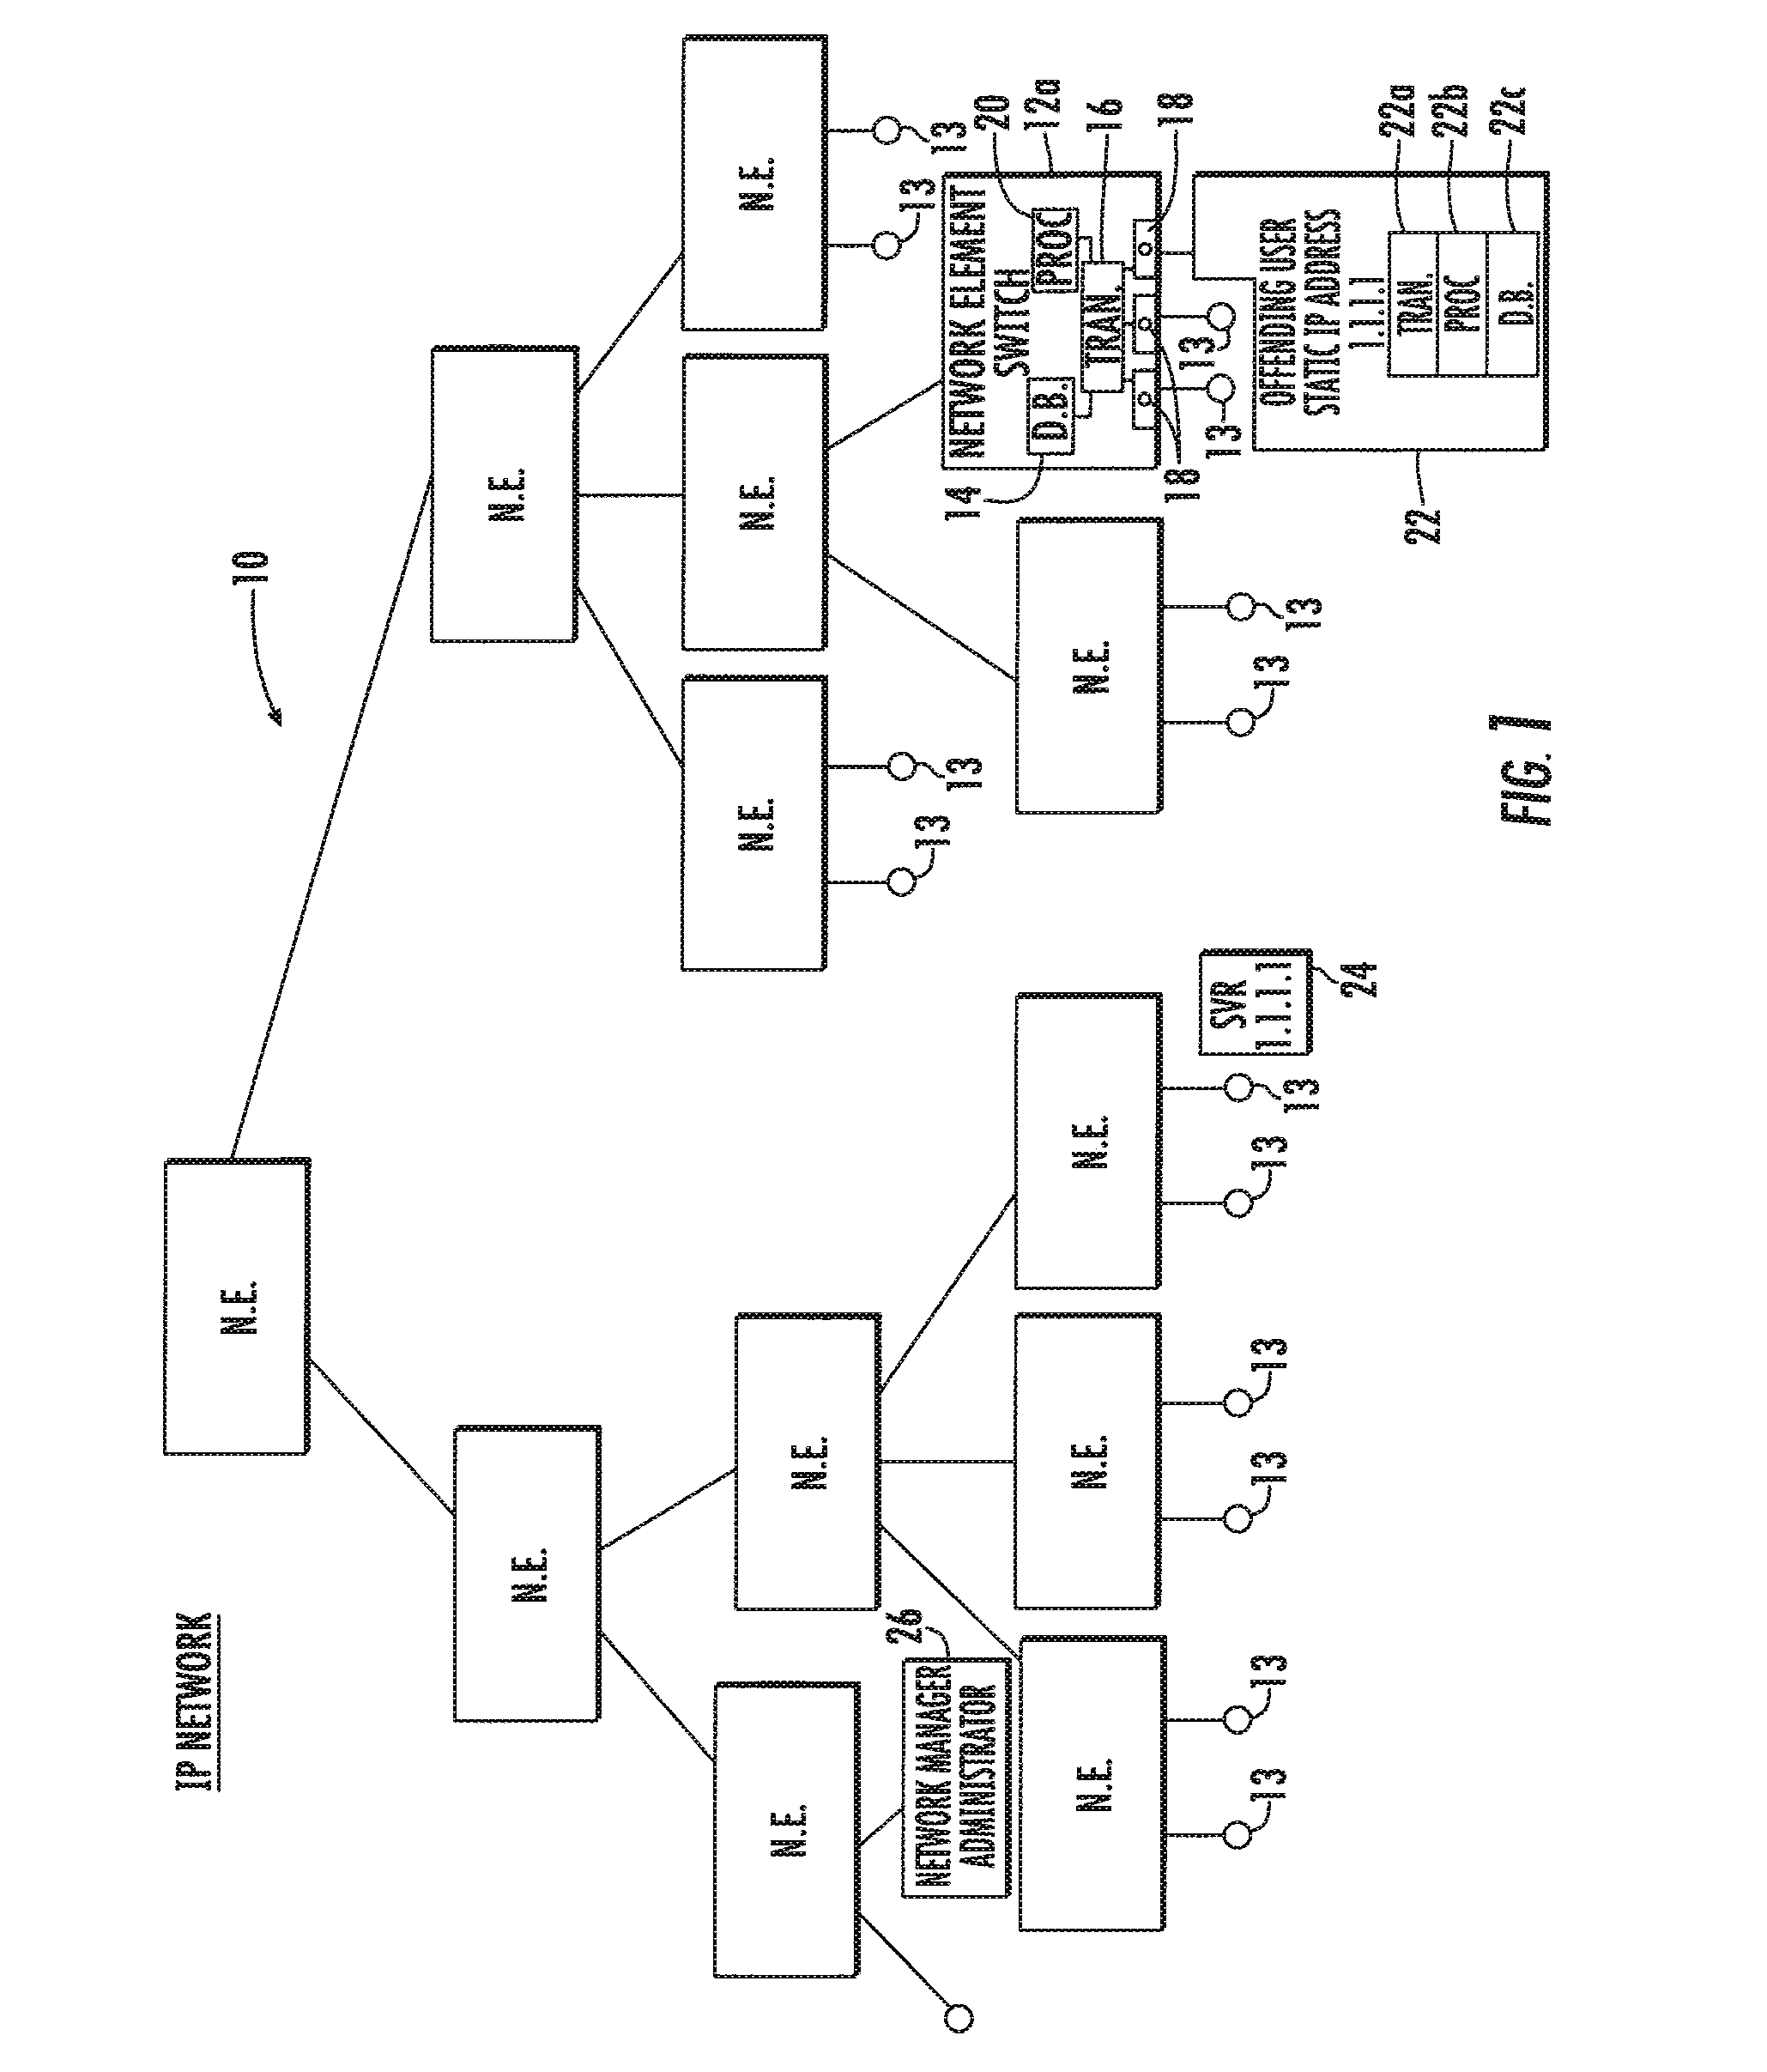 System and method for locating offending network device and maintaining network integrity